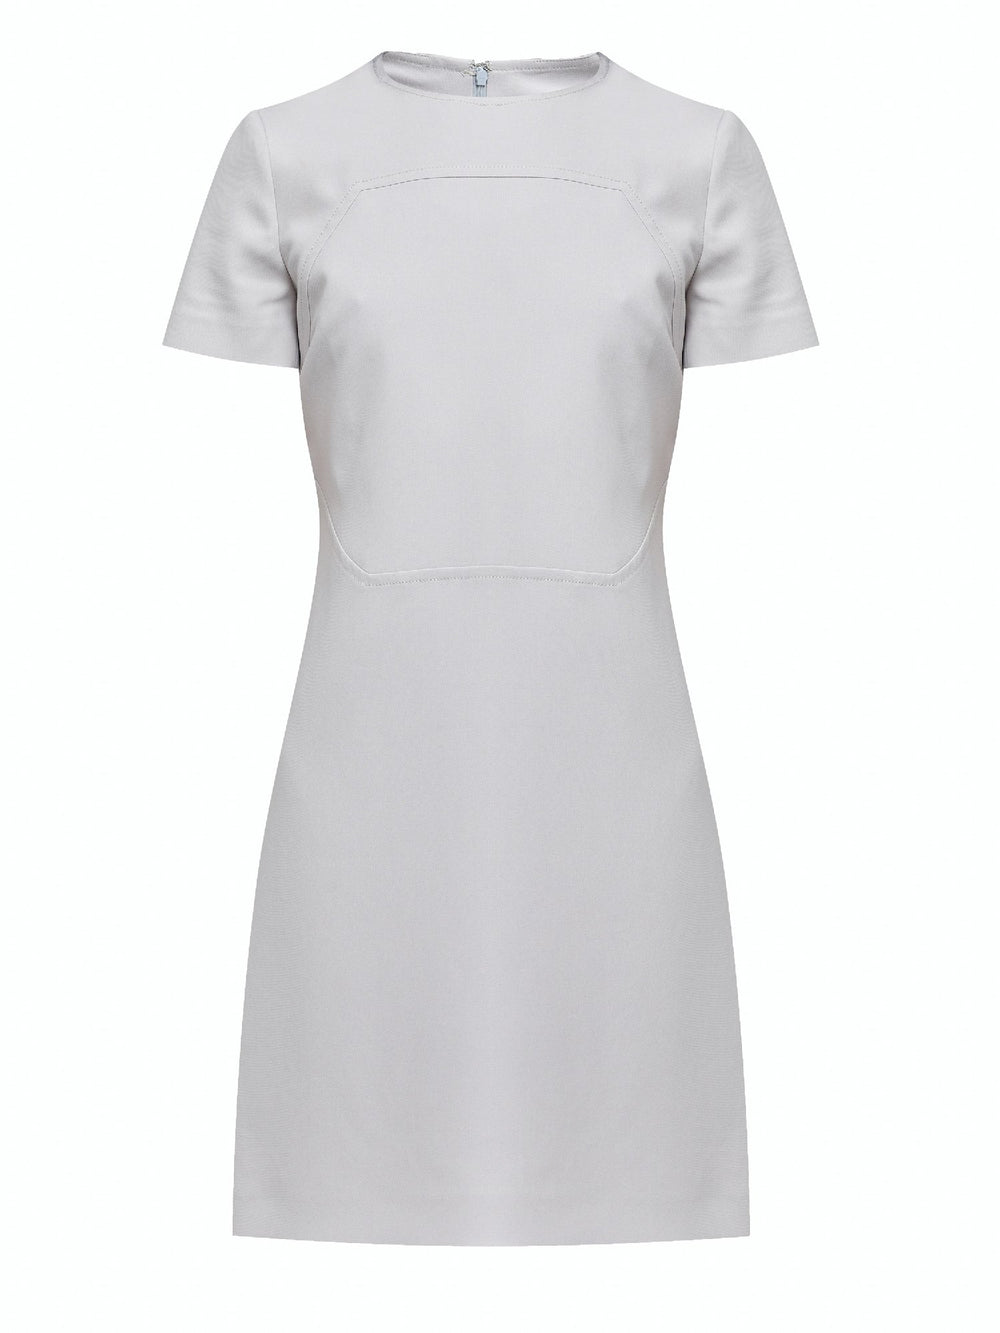 Marina, an elegant A-line dress, fabricated in ligth silver double crepe. An expertly tailored form flattering silhouette that falls right over-the-knee, with a hint of elastane to ensure comfort & ease of movement. 